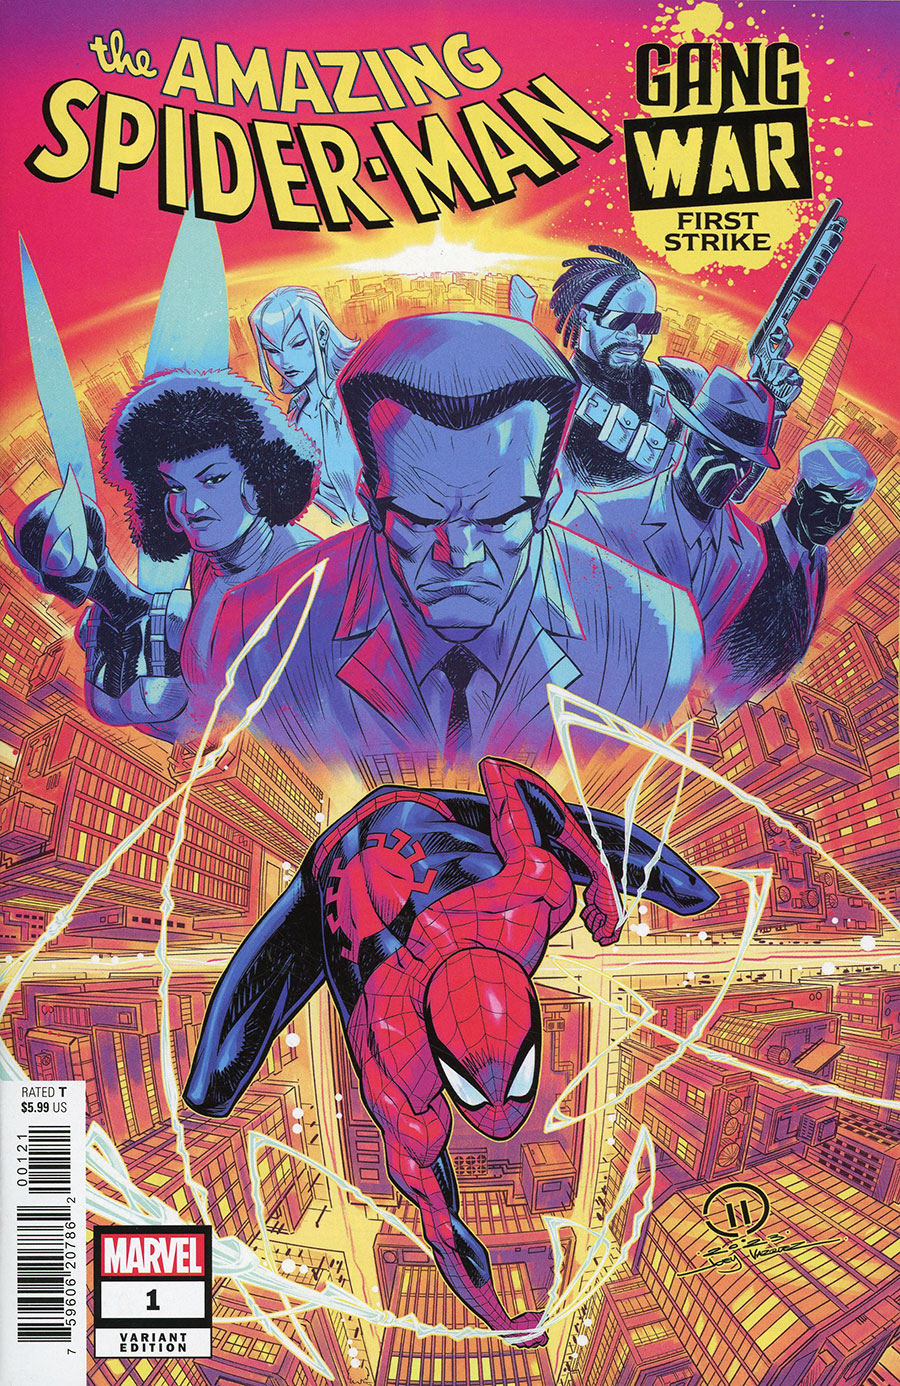 Amazing Spider-Man Gang War First Strike #1 (One Shot) Cover B Variant Joey Vazquez Cover